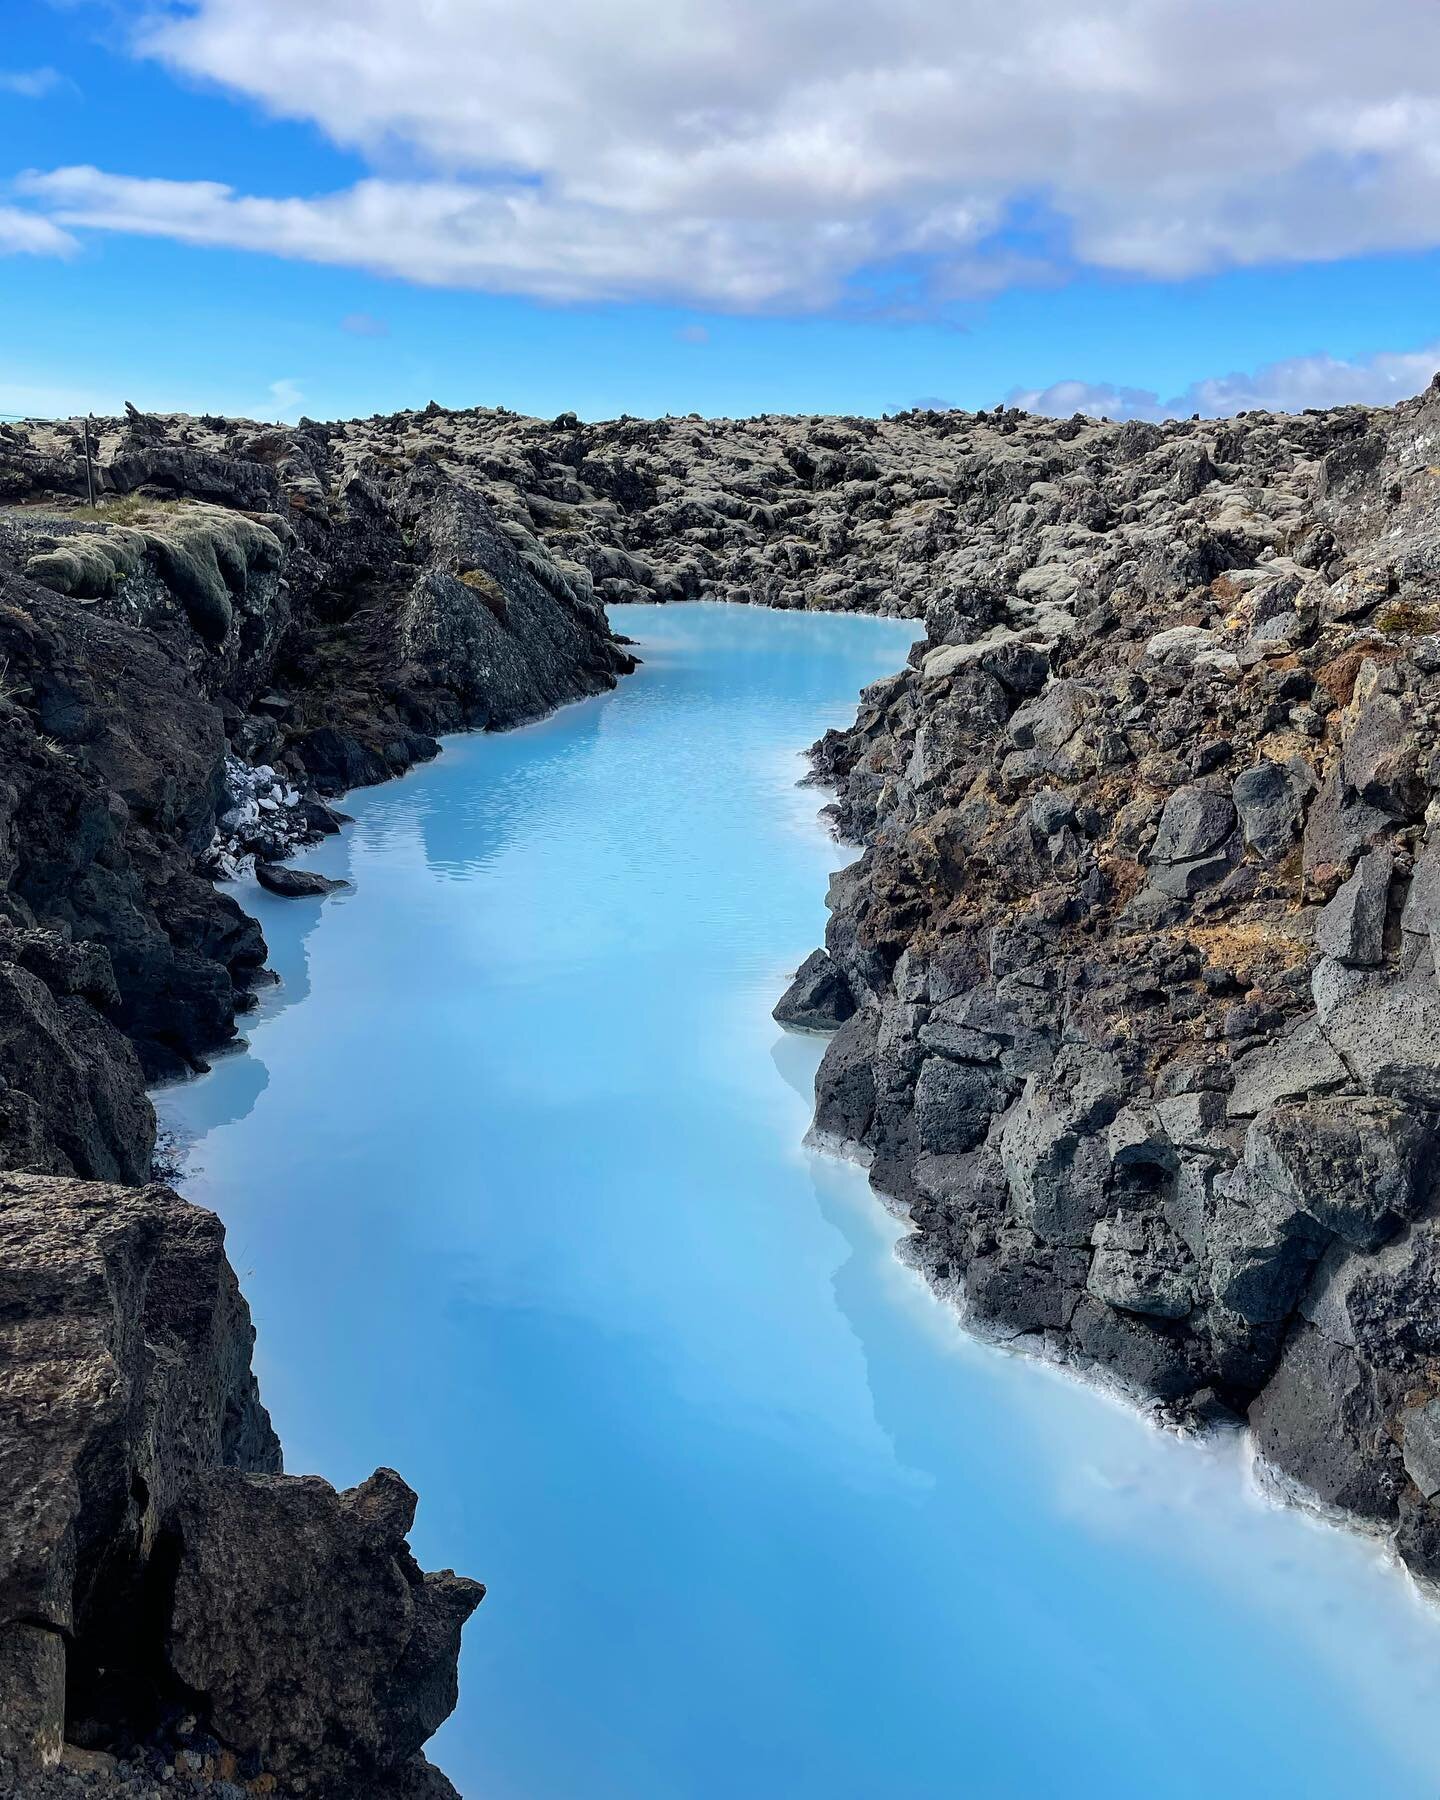 Goodbye for now, but not forever. We&rsquo;ll miss you, Iceland. 
.
.
.
.
.
.
.
#iceland #blue #bluelagoon #scenery #icelandscape #icelandtravel #icelandtrip #travel #vacation #vacationmode #lagoon #lava #lavaflow